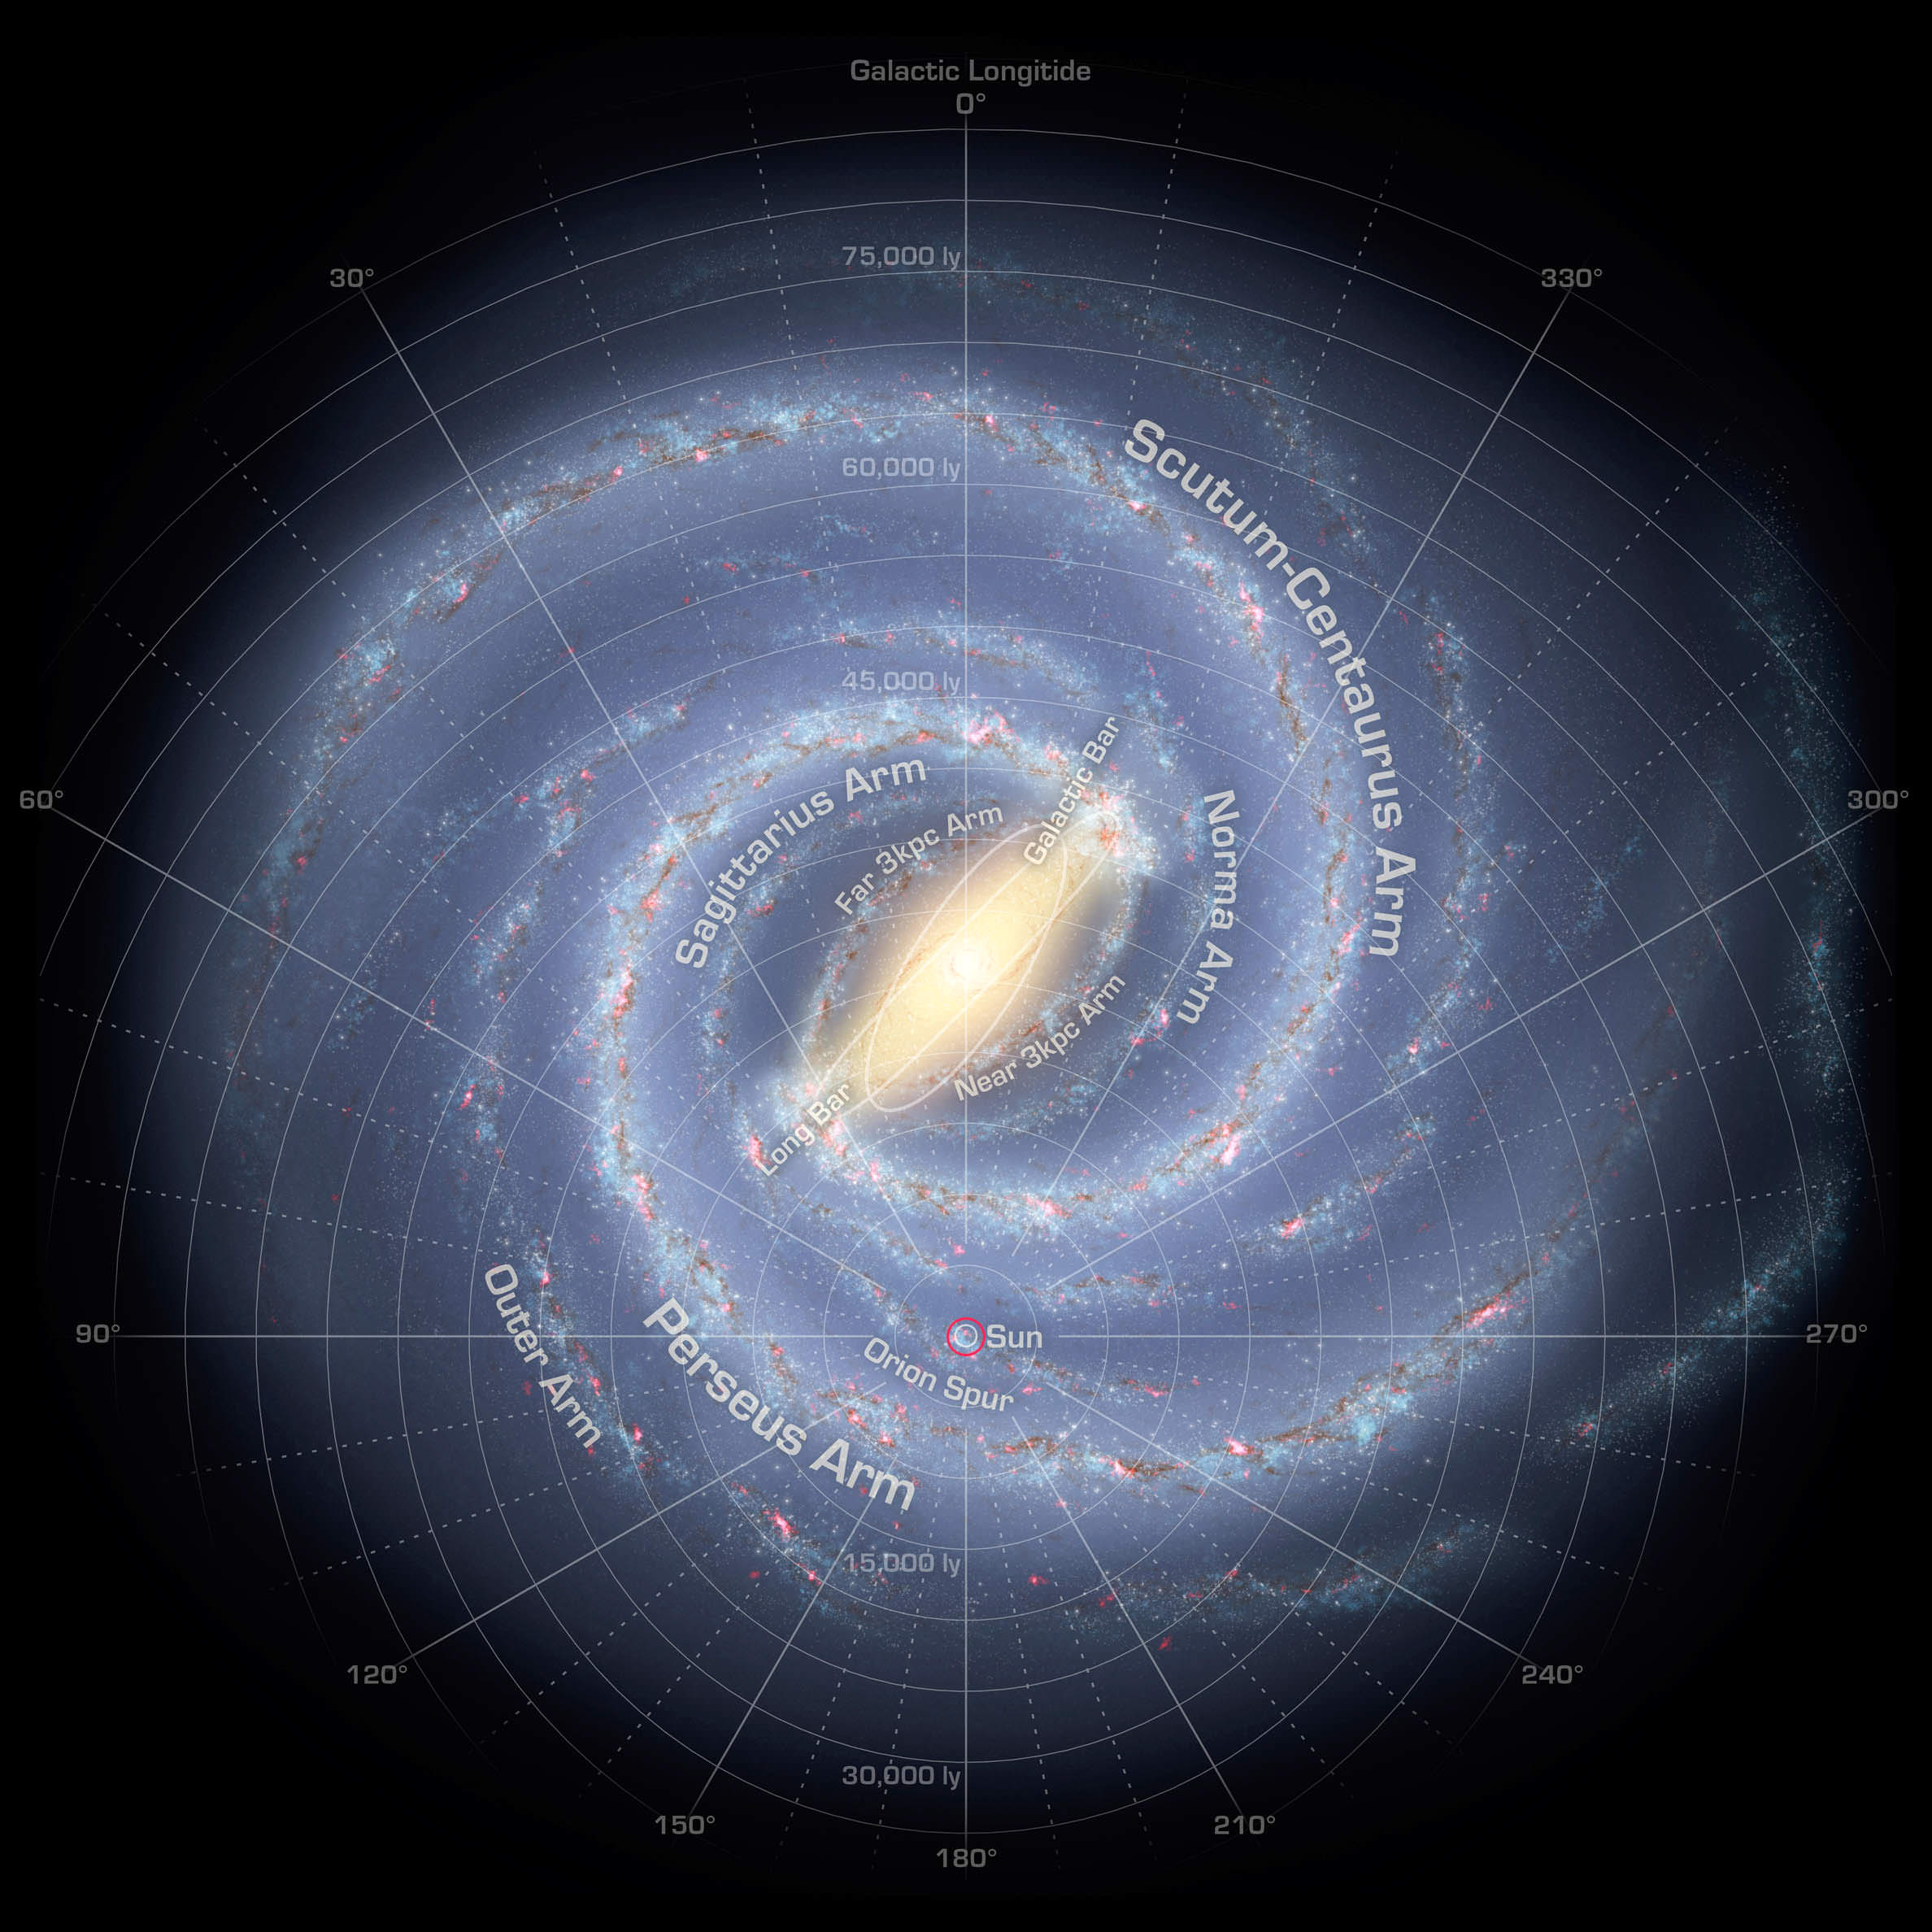 A protogalaxy in the Milky Way may be our galaxy's original nucleus